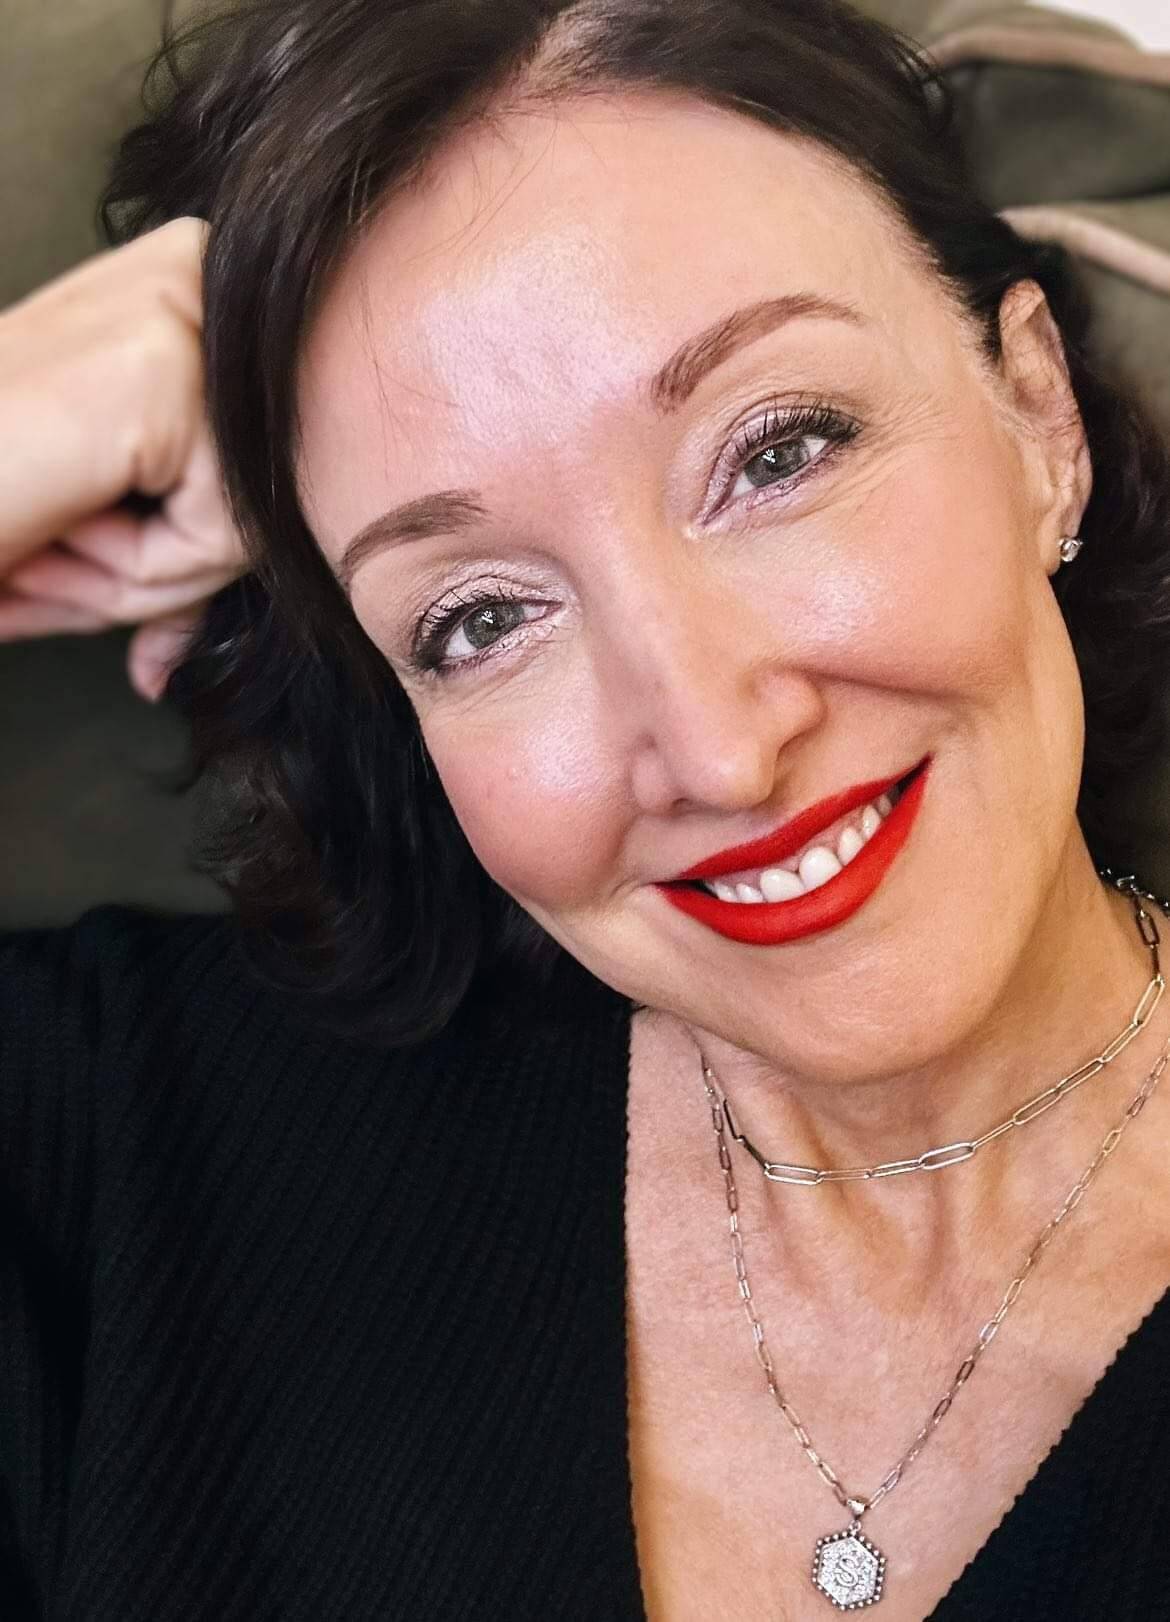 Suzan Hall, an over 50 GenX enthusiast, with short black hair, a slender build, and impeccable makeup, including striking red lipstick. She's proudly sporting a GenX t-shirt, radiating confidence and style. 50 plus women of Instagram 